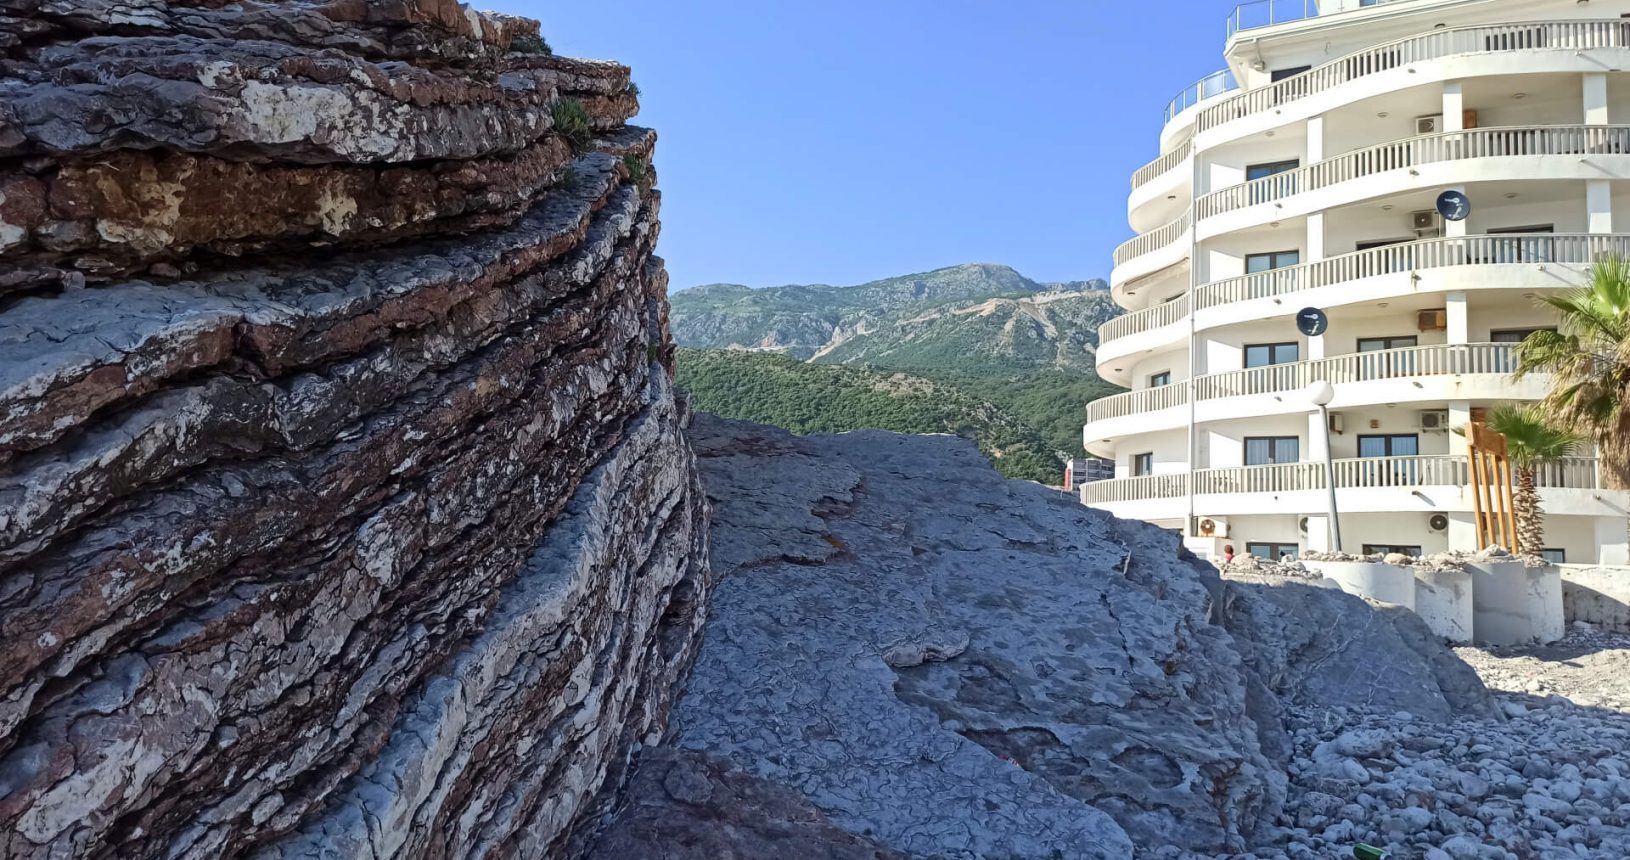 Building and background mountains at Rafailovici rocky beach